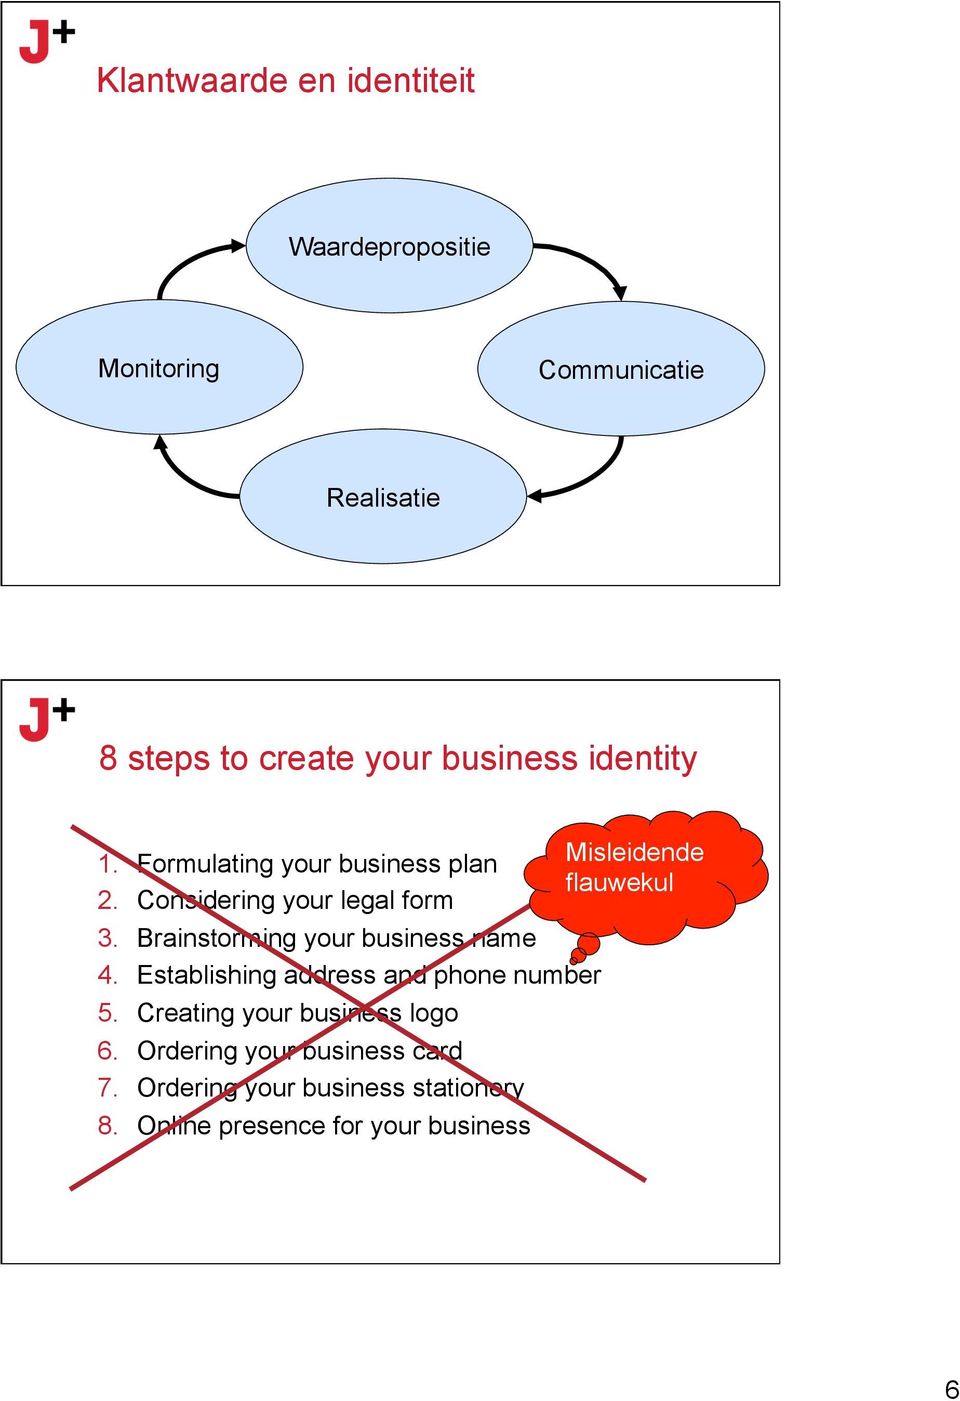 Brainstorming your business name 4. Establishing address and phone number 5.